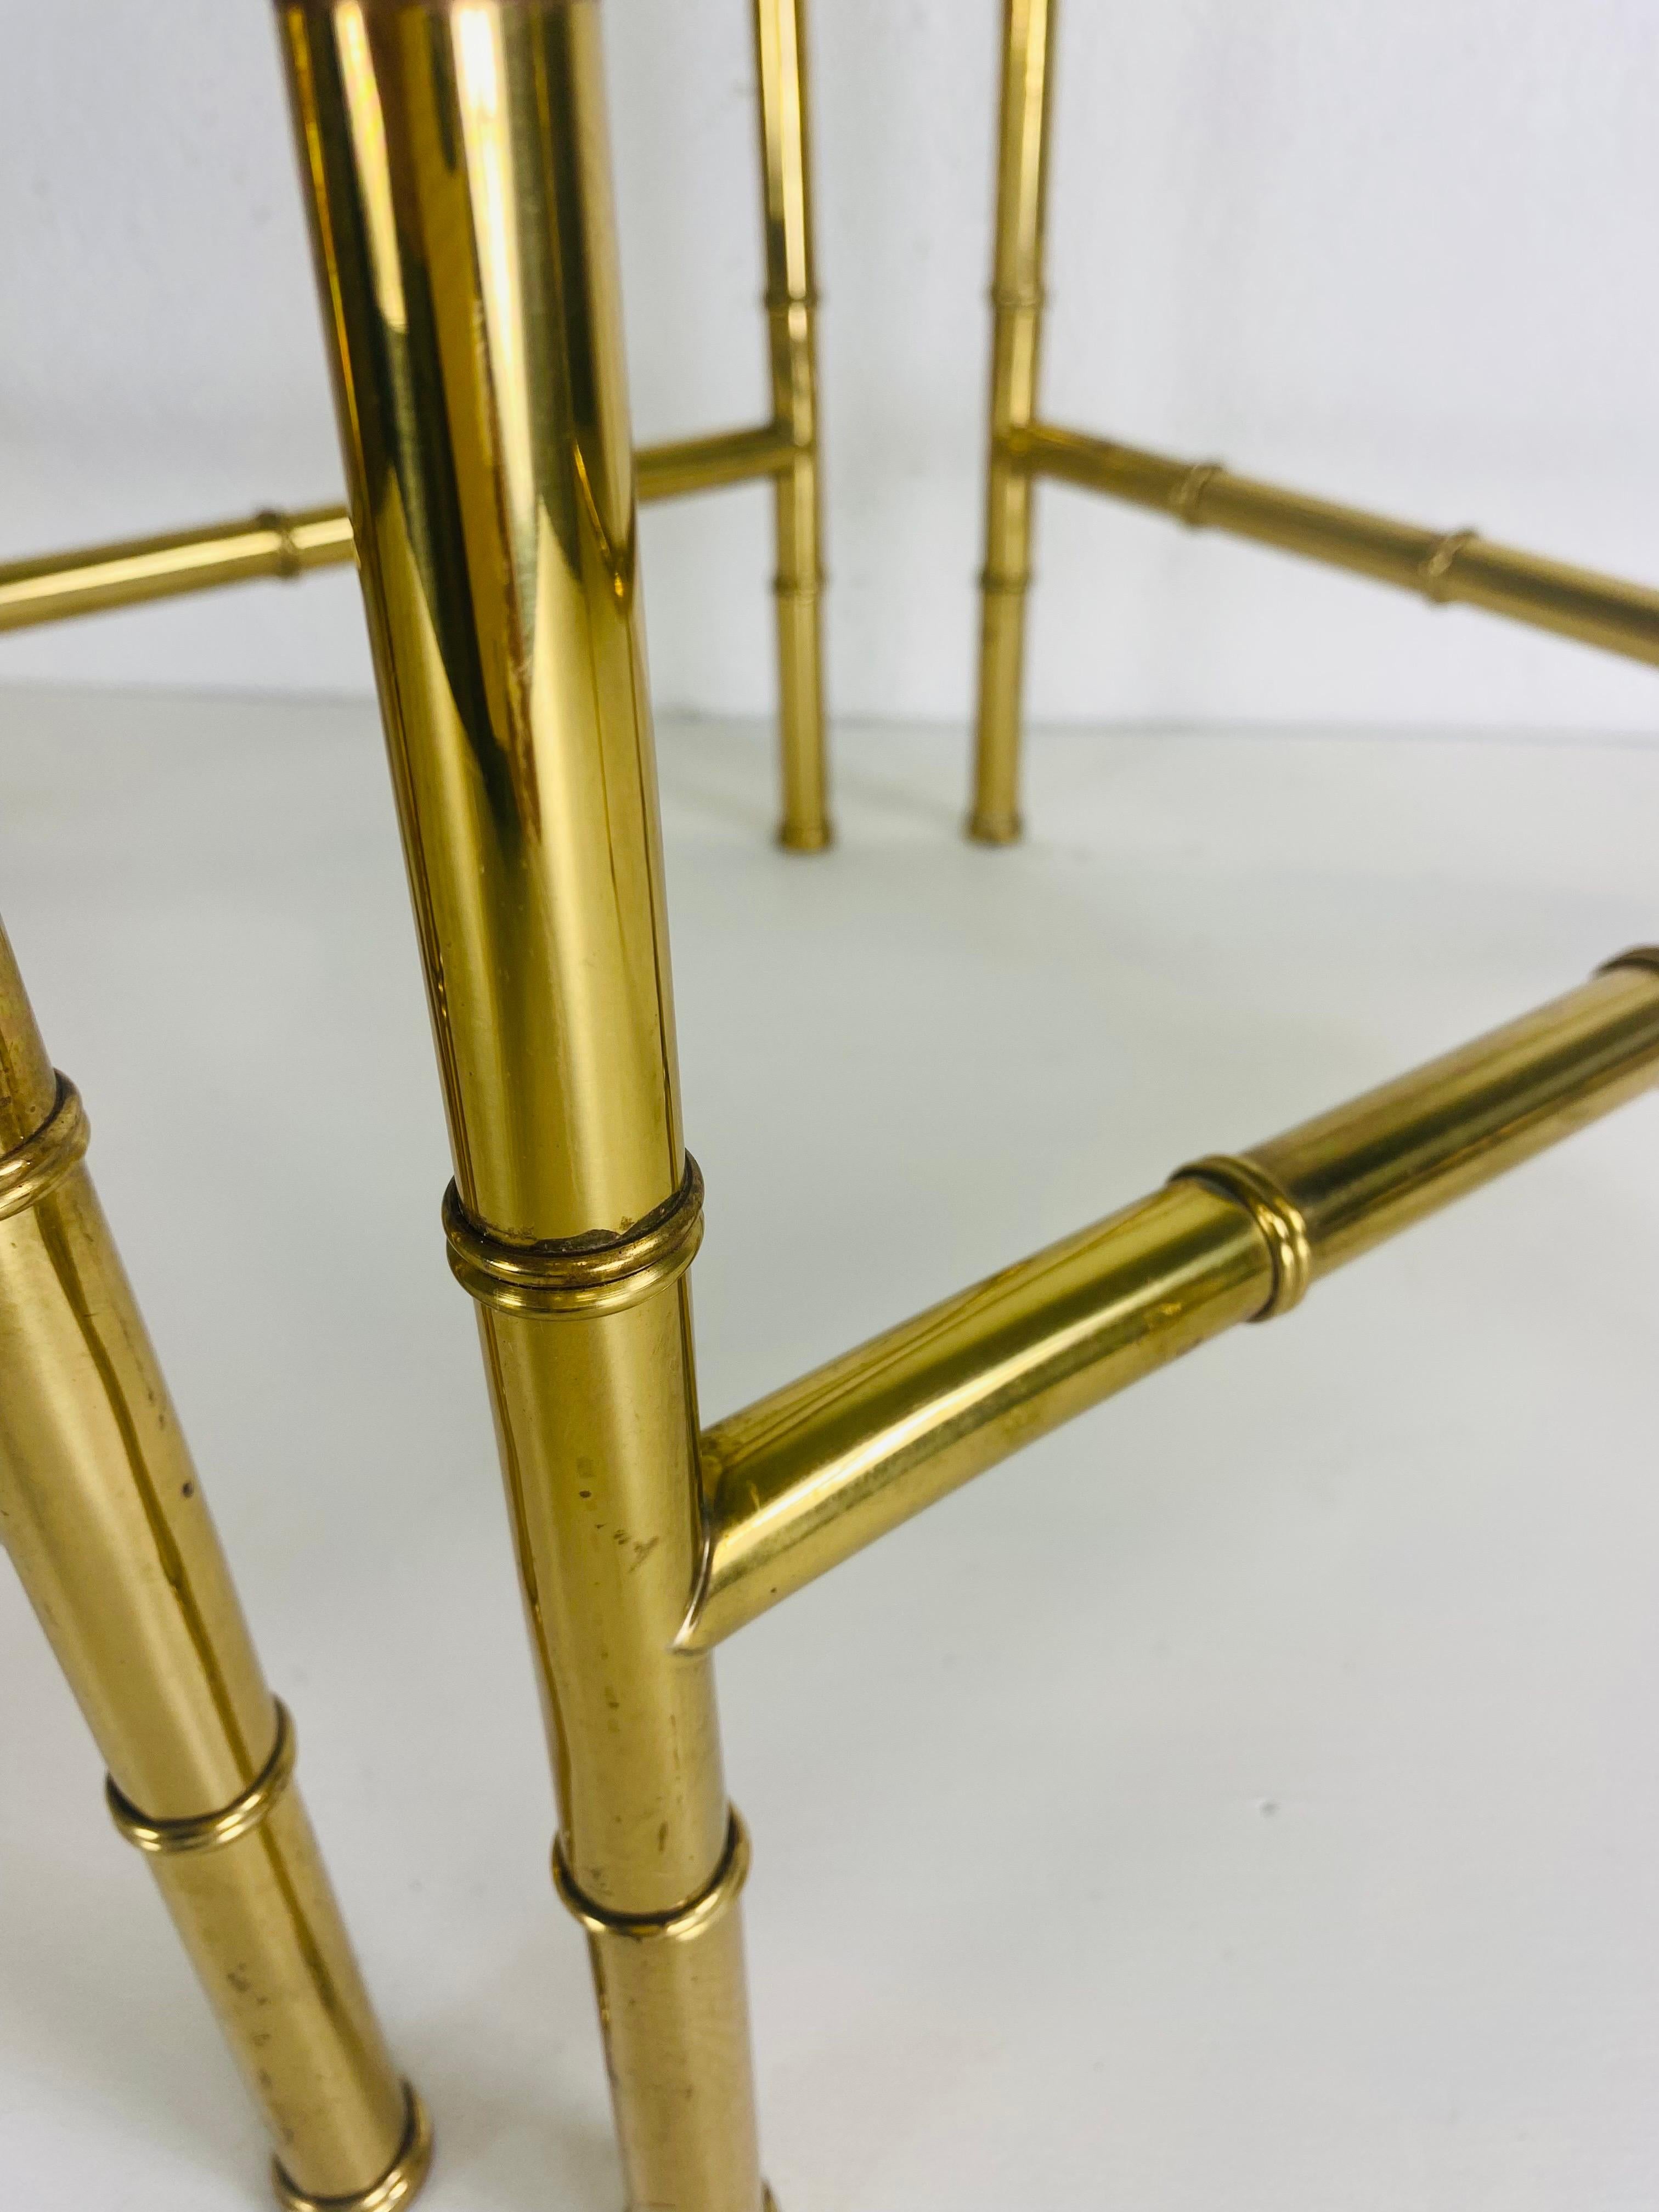 This is a pair of super chic solid brass Regency inspired side tables. This pair of clean streamline side tables features the original heavy glass table top. The tables have a faux bamboo leg and cross stretchers with a clean straight line at the